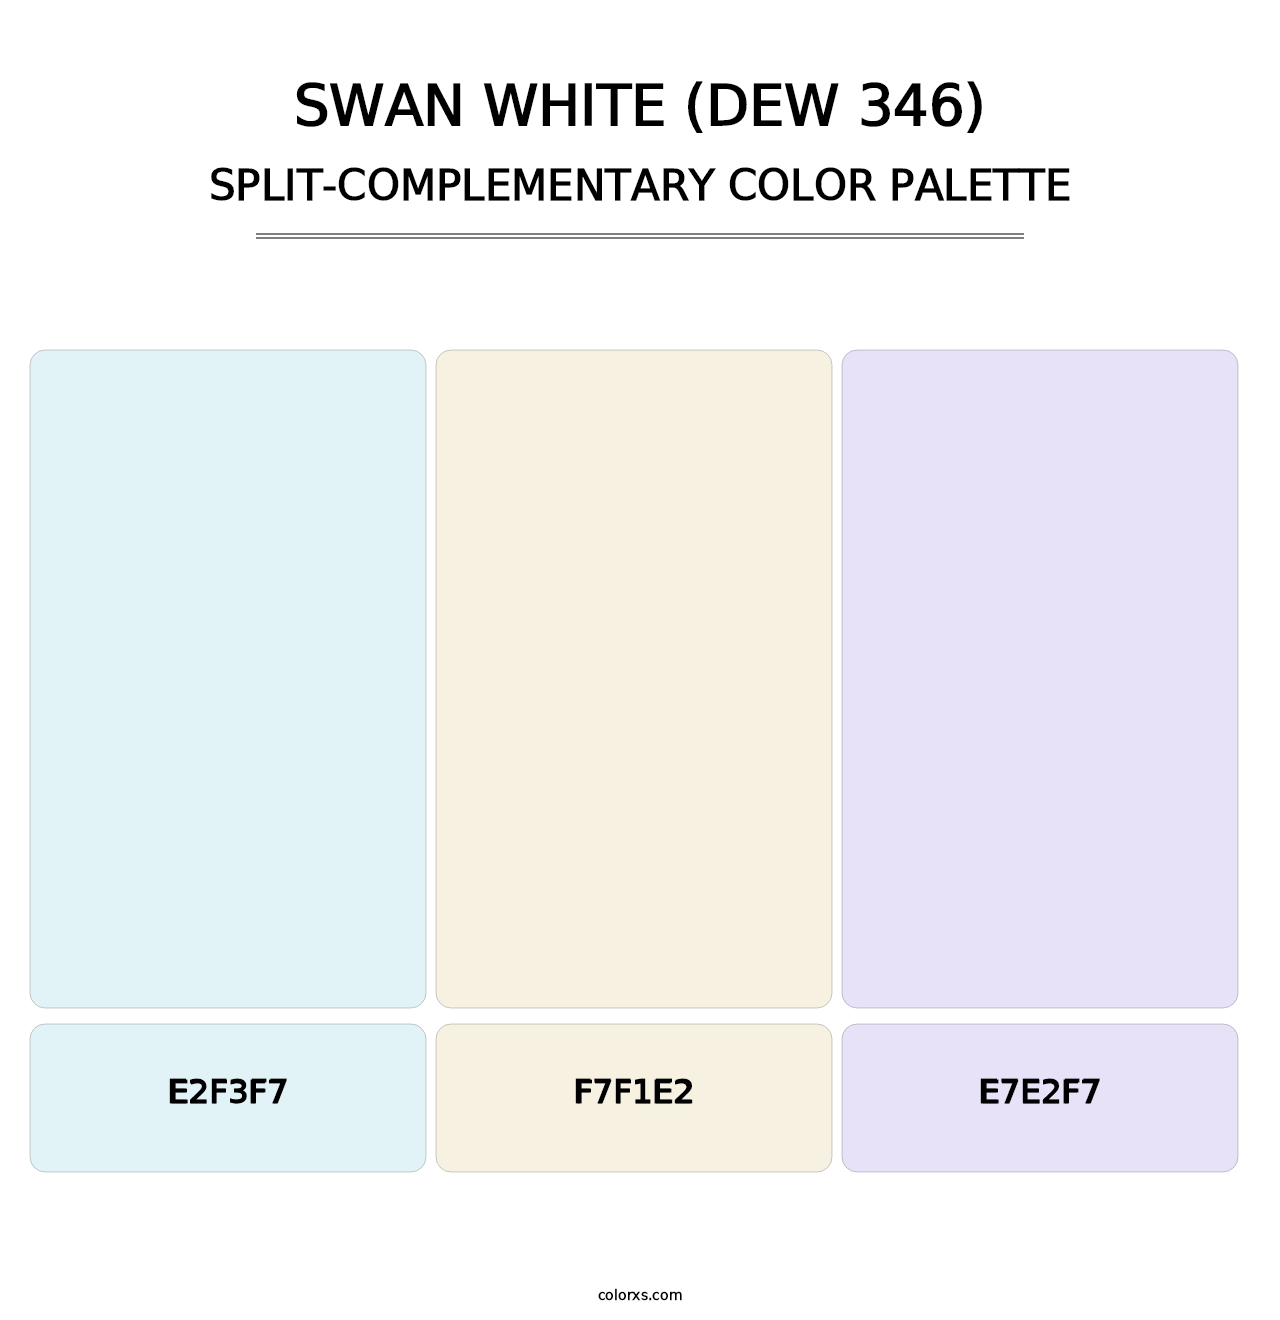 Swan White (DEW 346) - Split-Complementary Color Palette